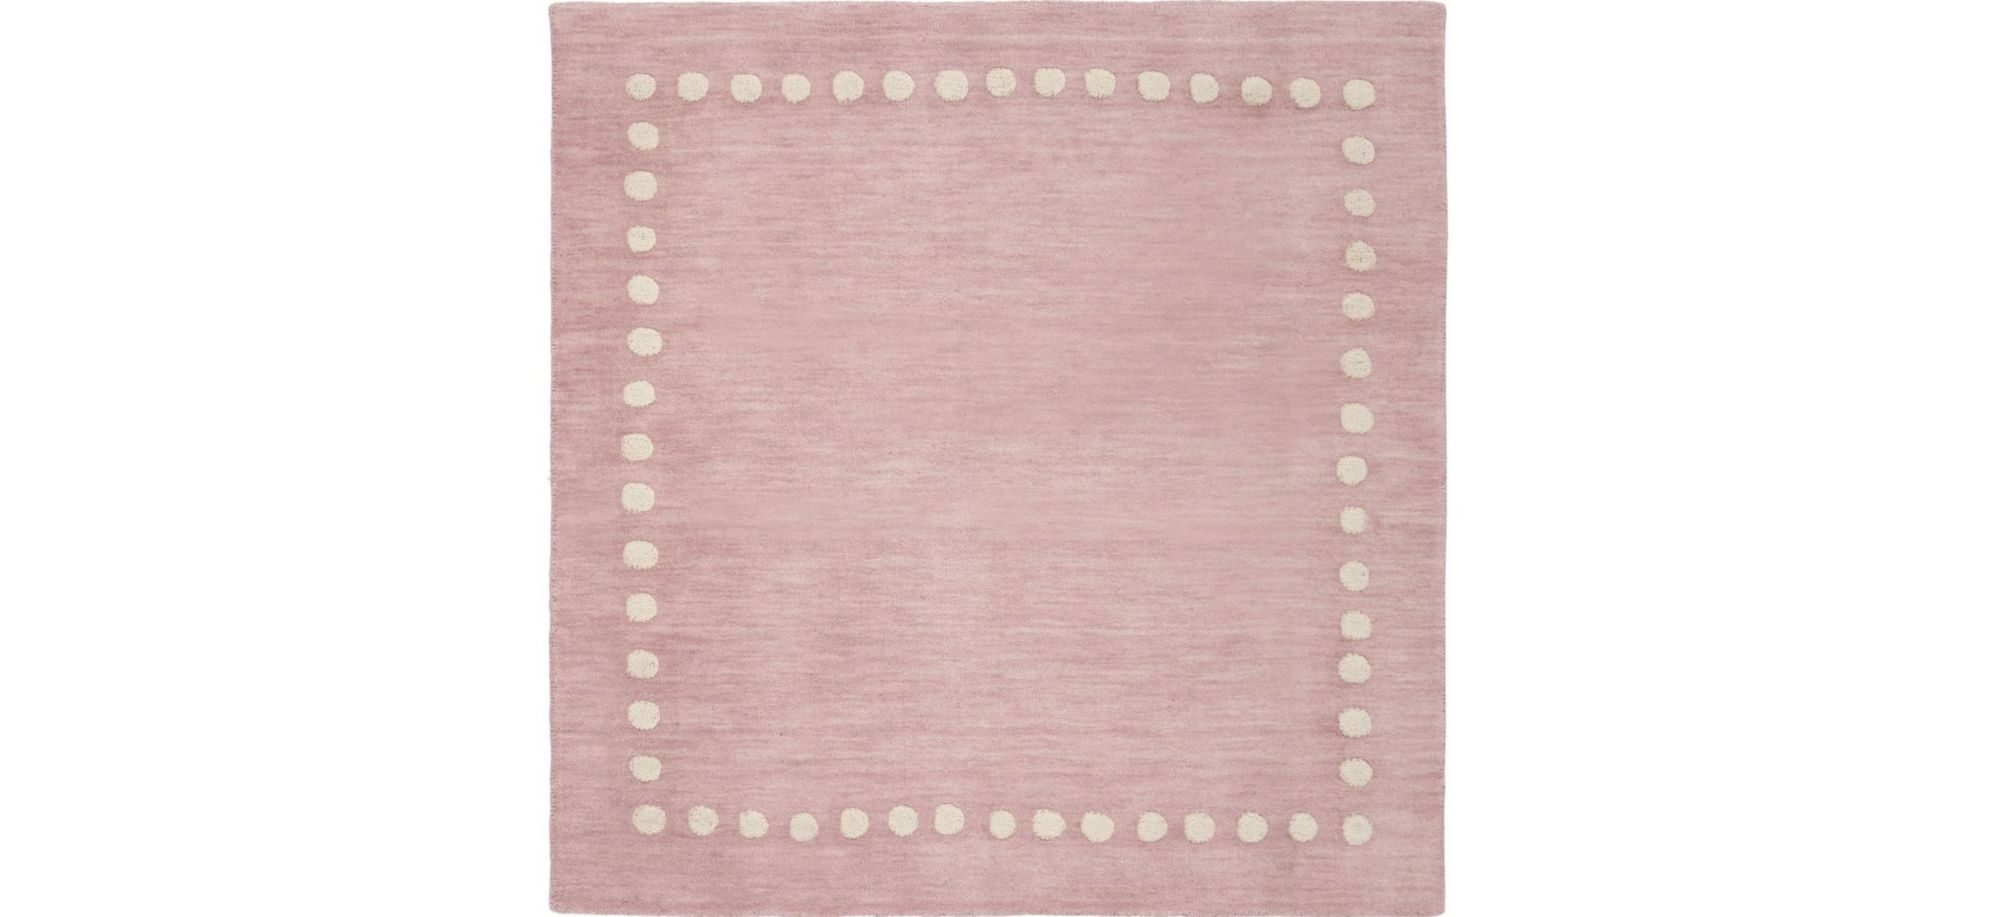 Finnian Kid's Area Rug in Pink by Safavieh